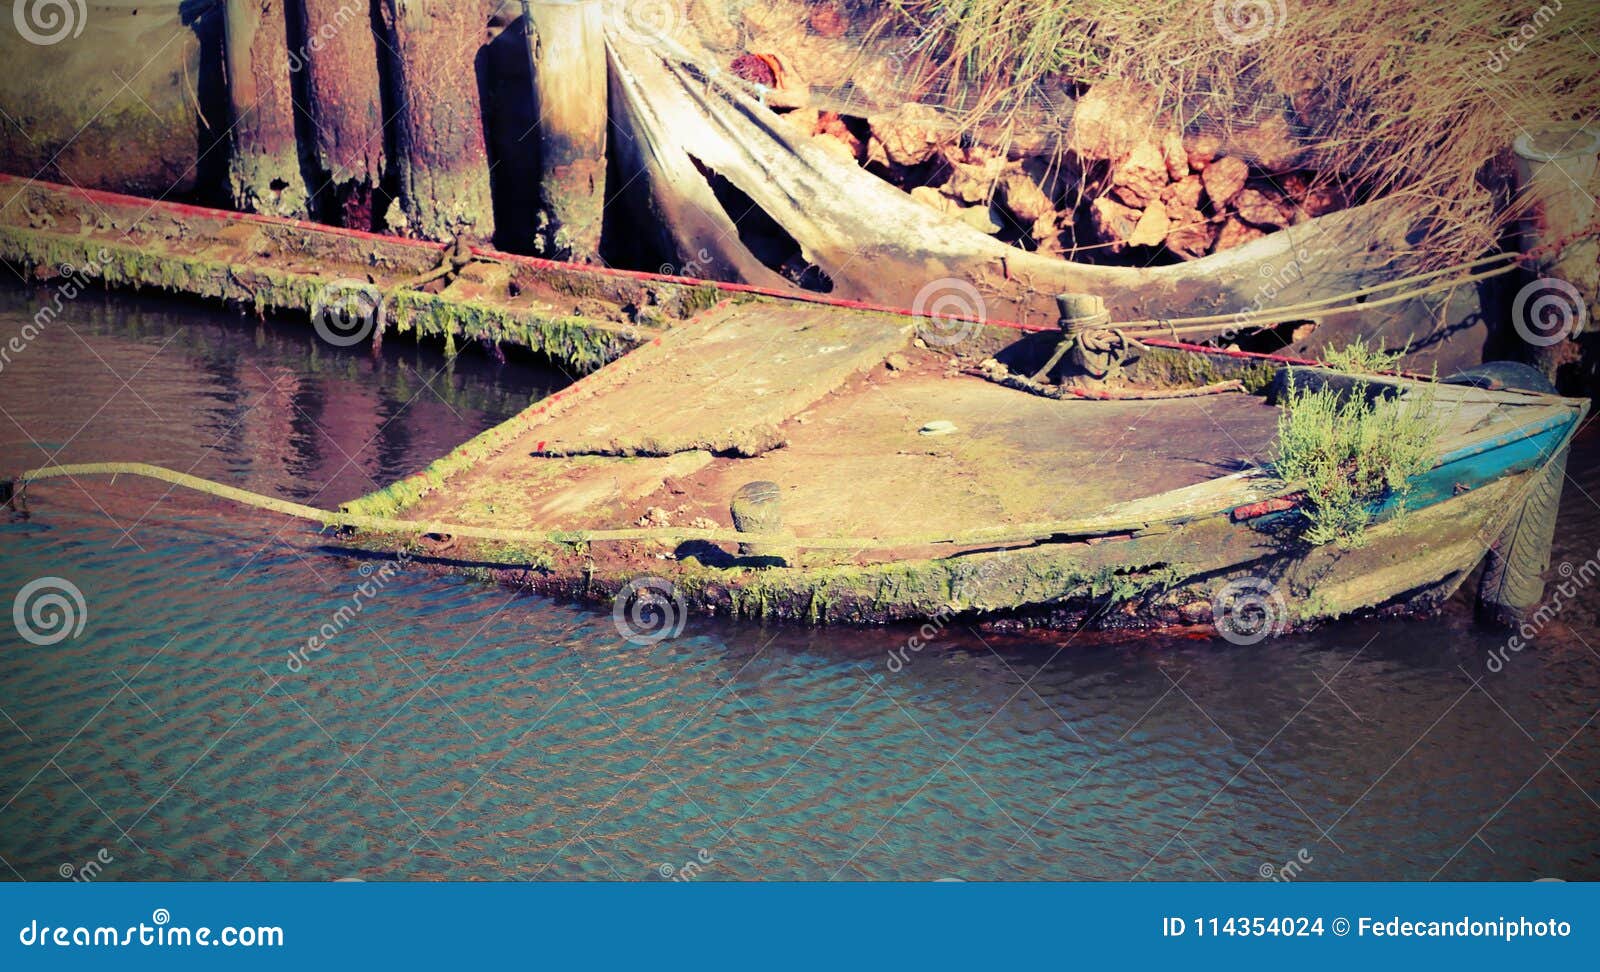 Wreck of a Sunken Fishing Boat with Vintage Effect Stock Photo - Image of  broken, abandon: 114354024